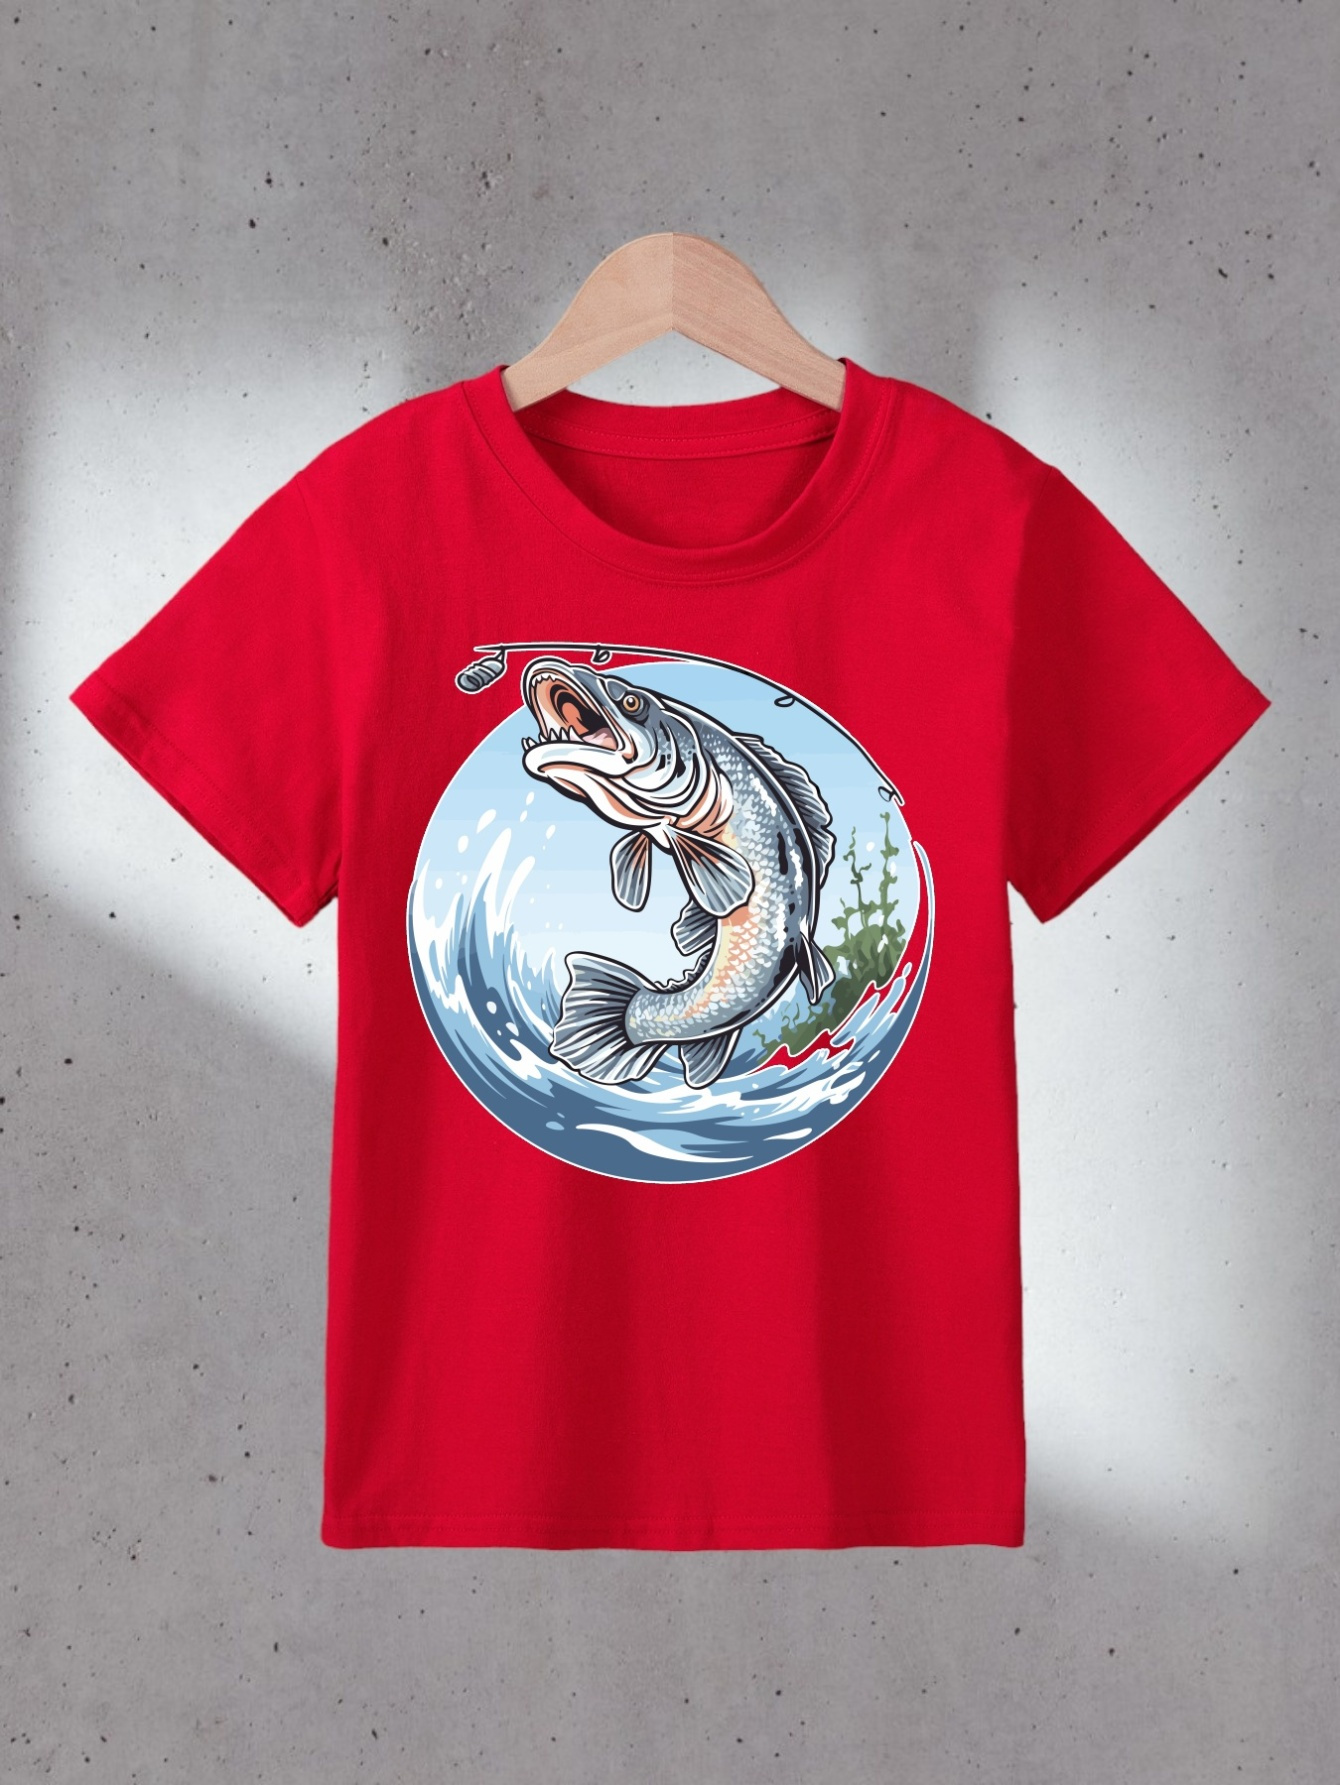 Boy's Fishing Print Cool T-shirt Clothing Casual Round Neck Short Sleeve Comfy Outdoors Outfit For Kids